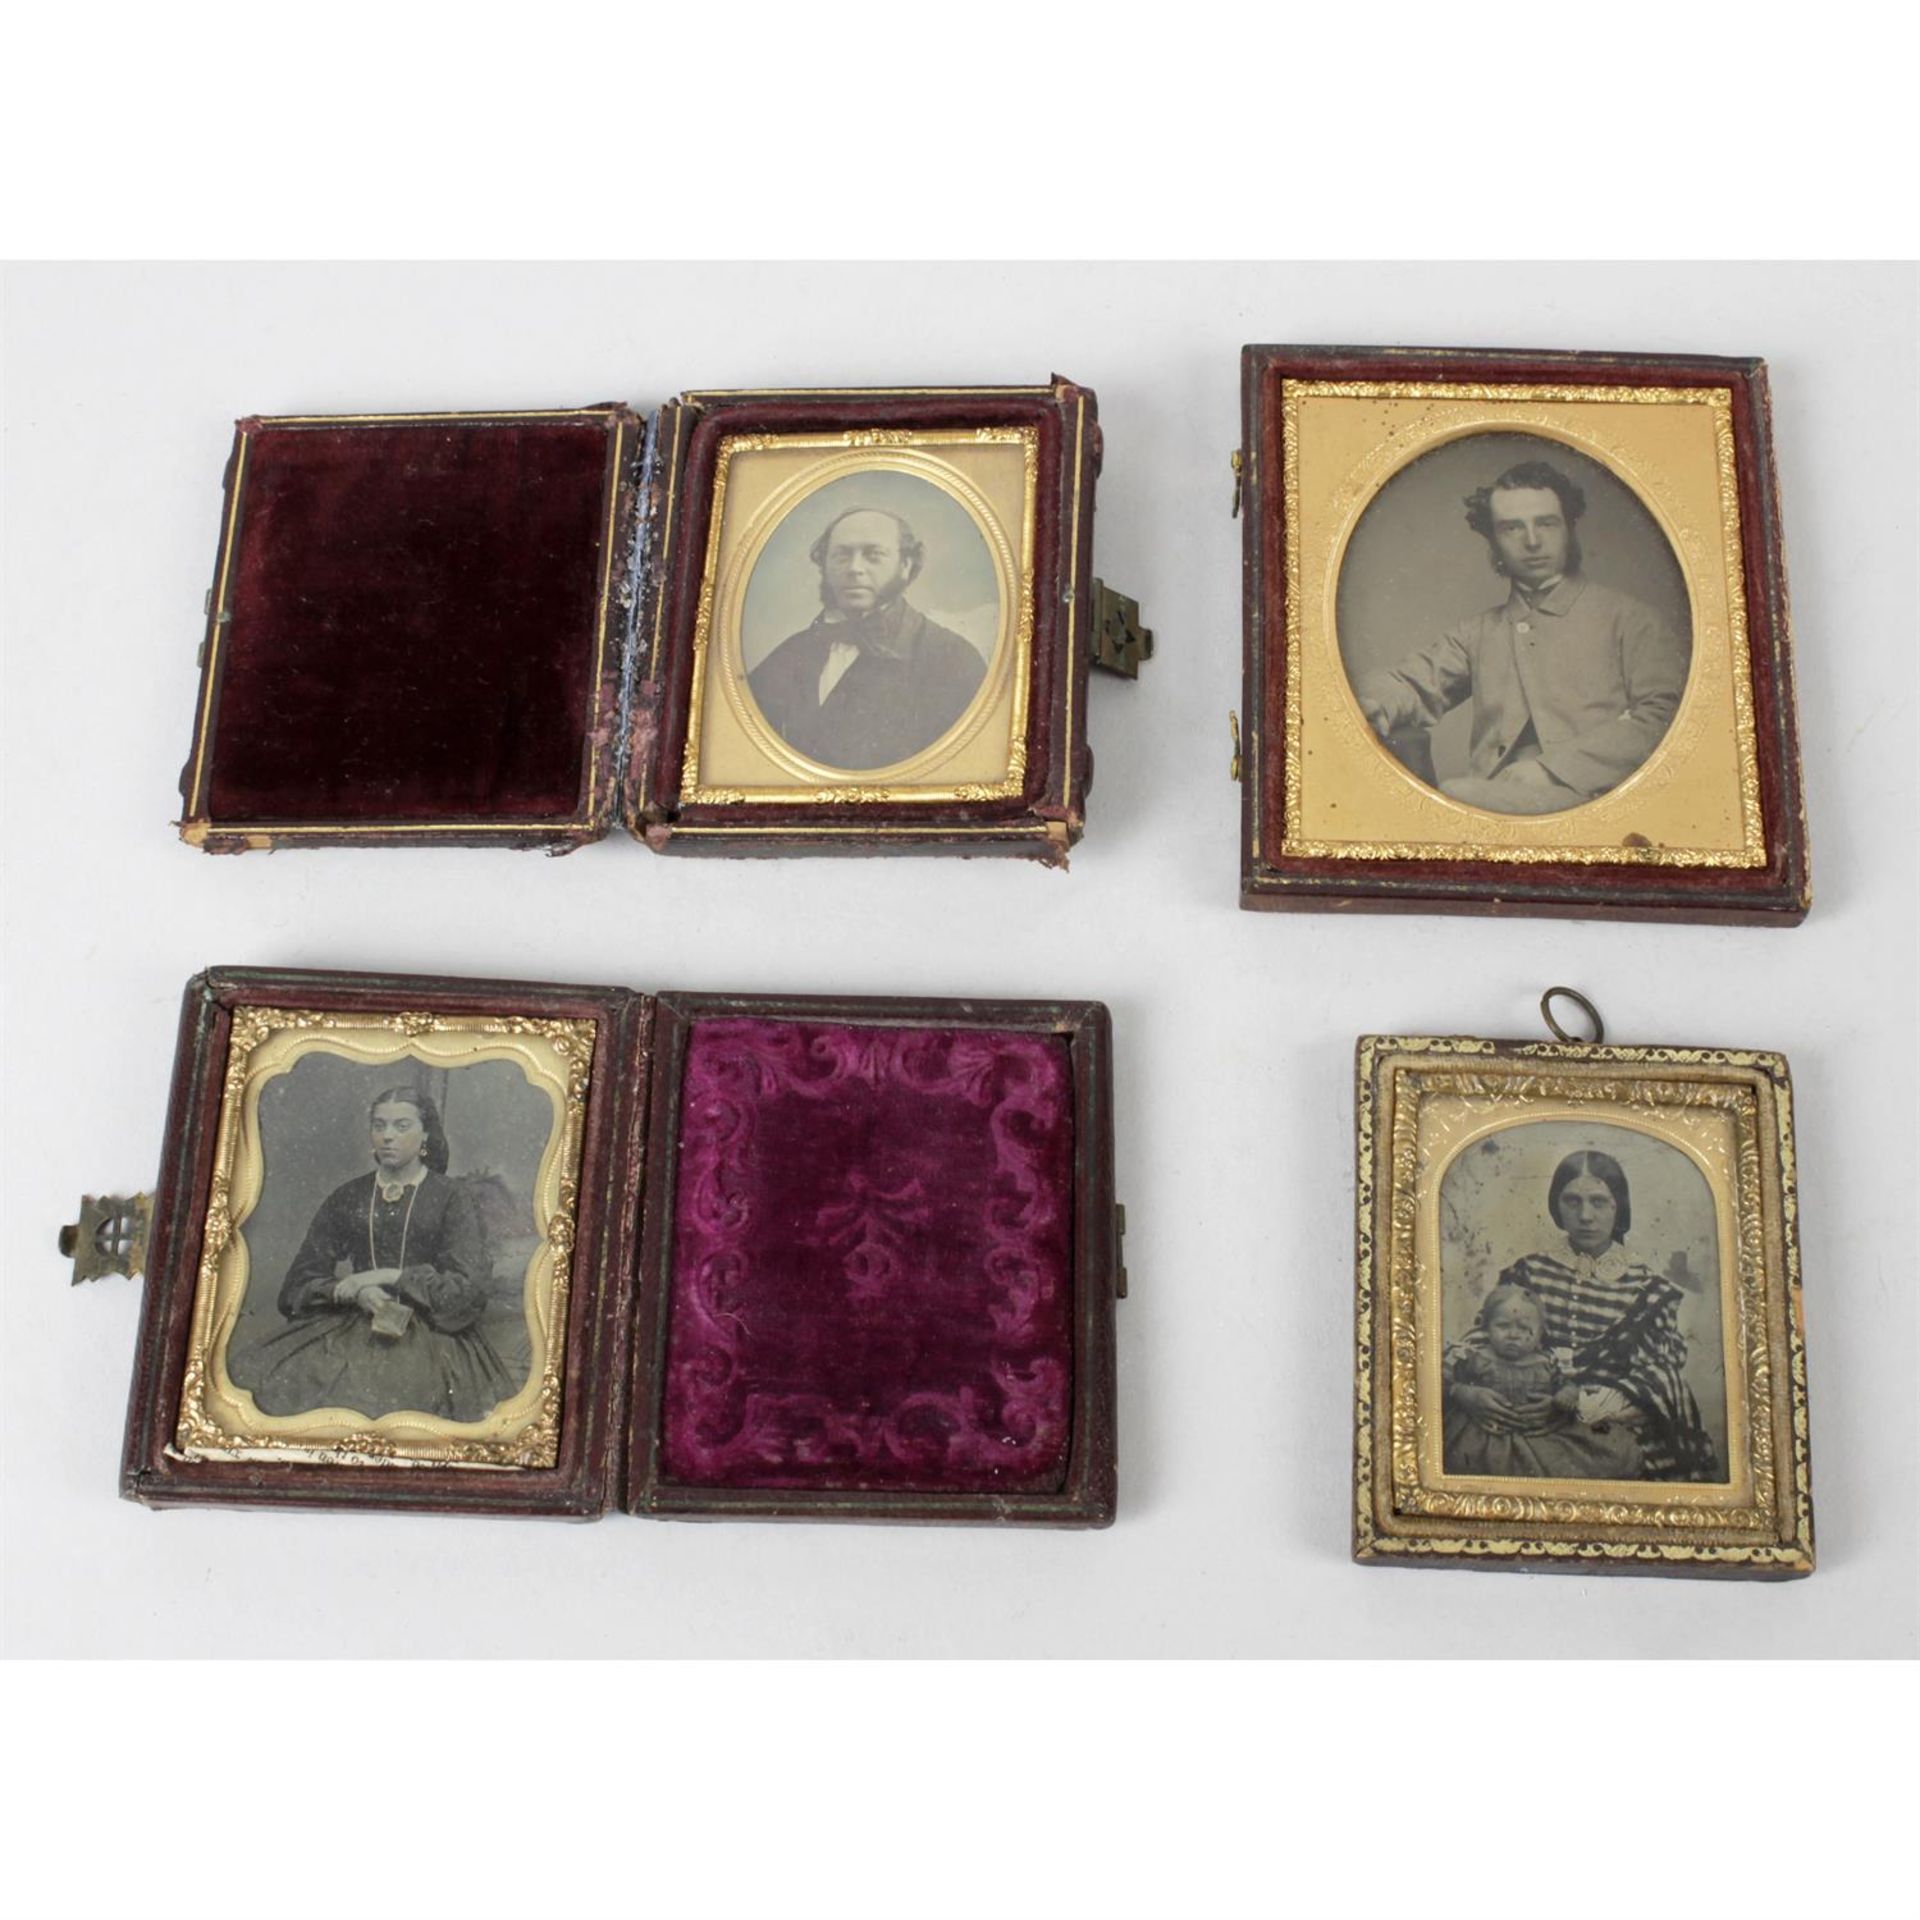 A quantity of late 19th/ early 20th century monochrome photographic portraits, etc.